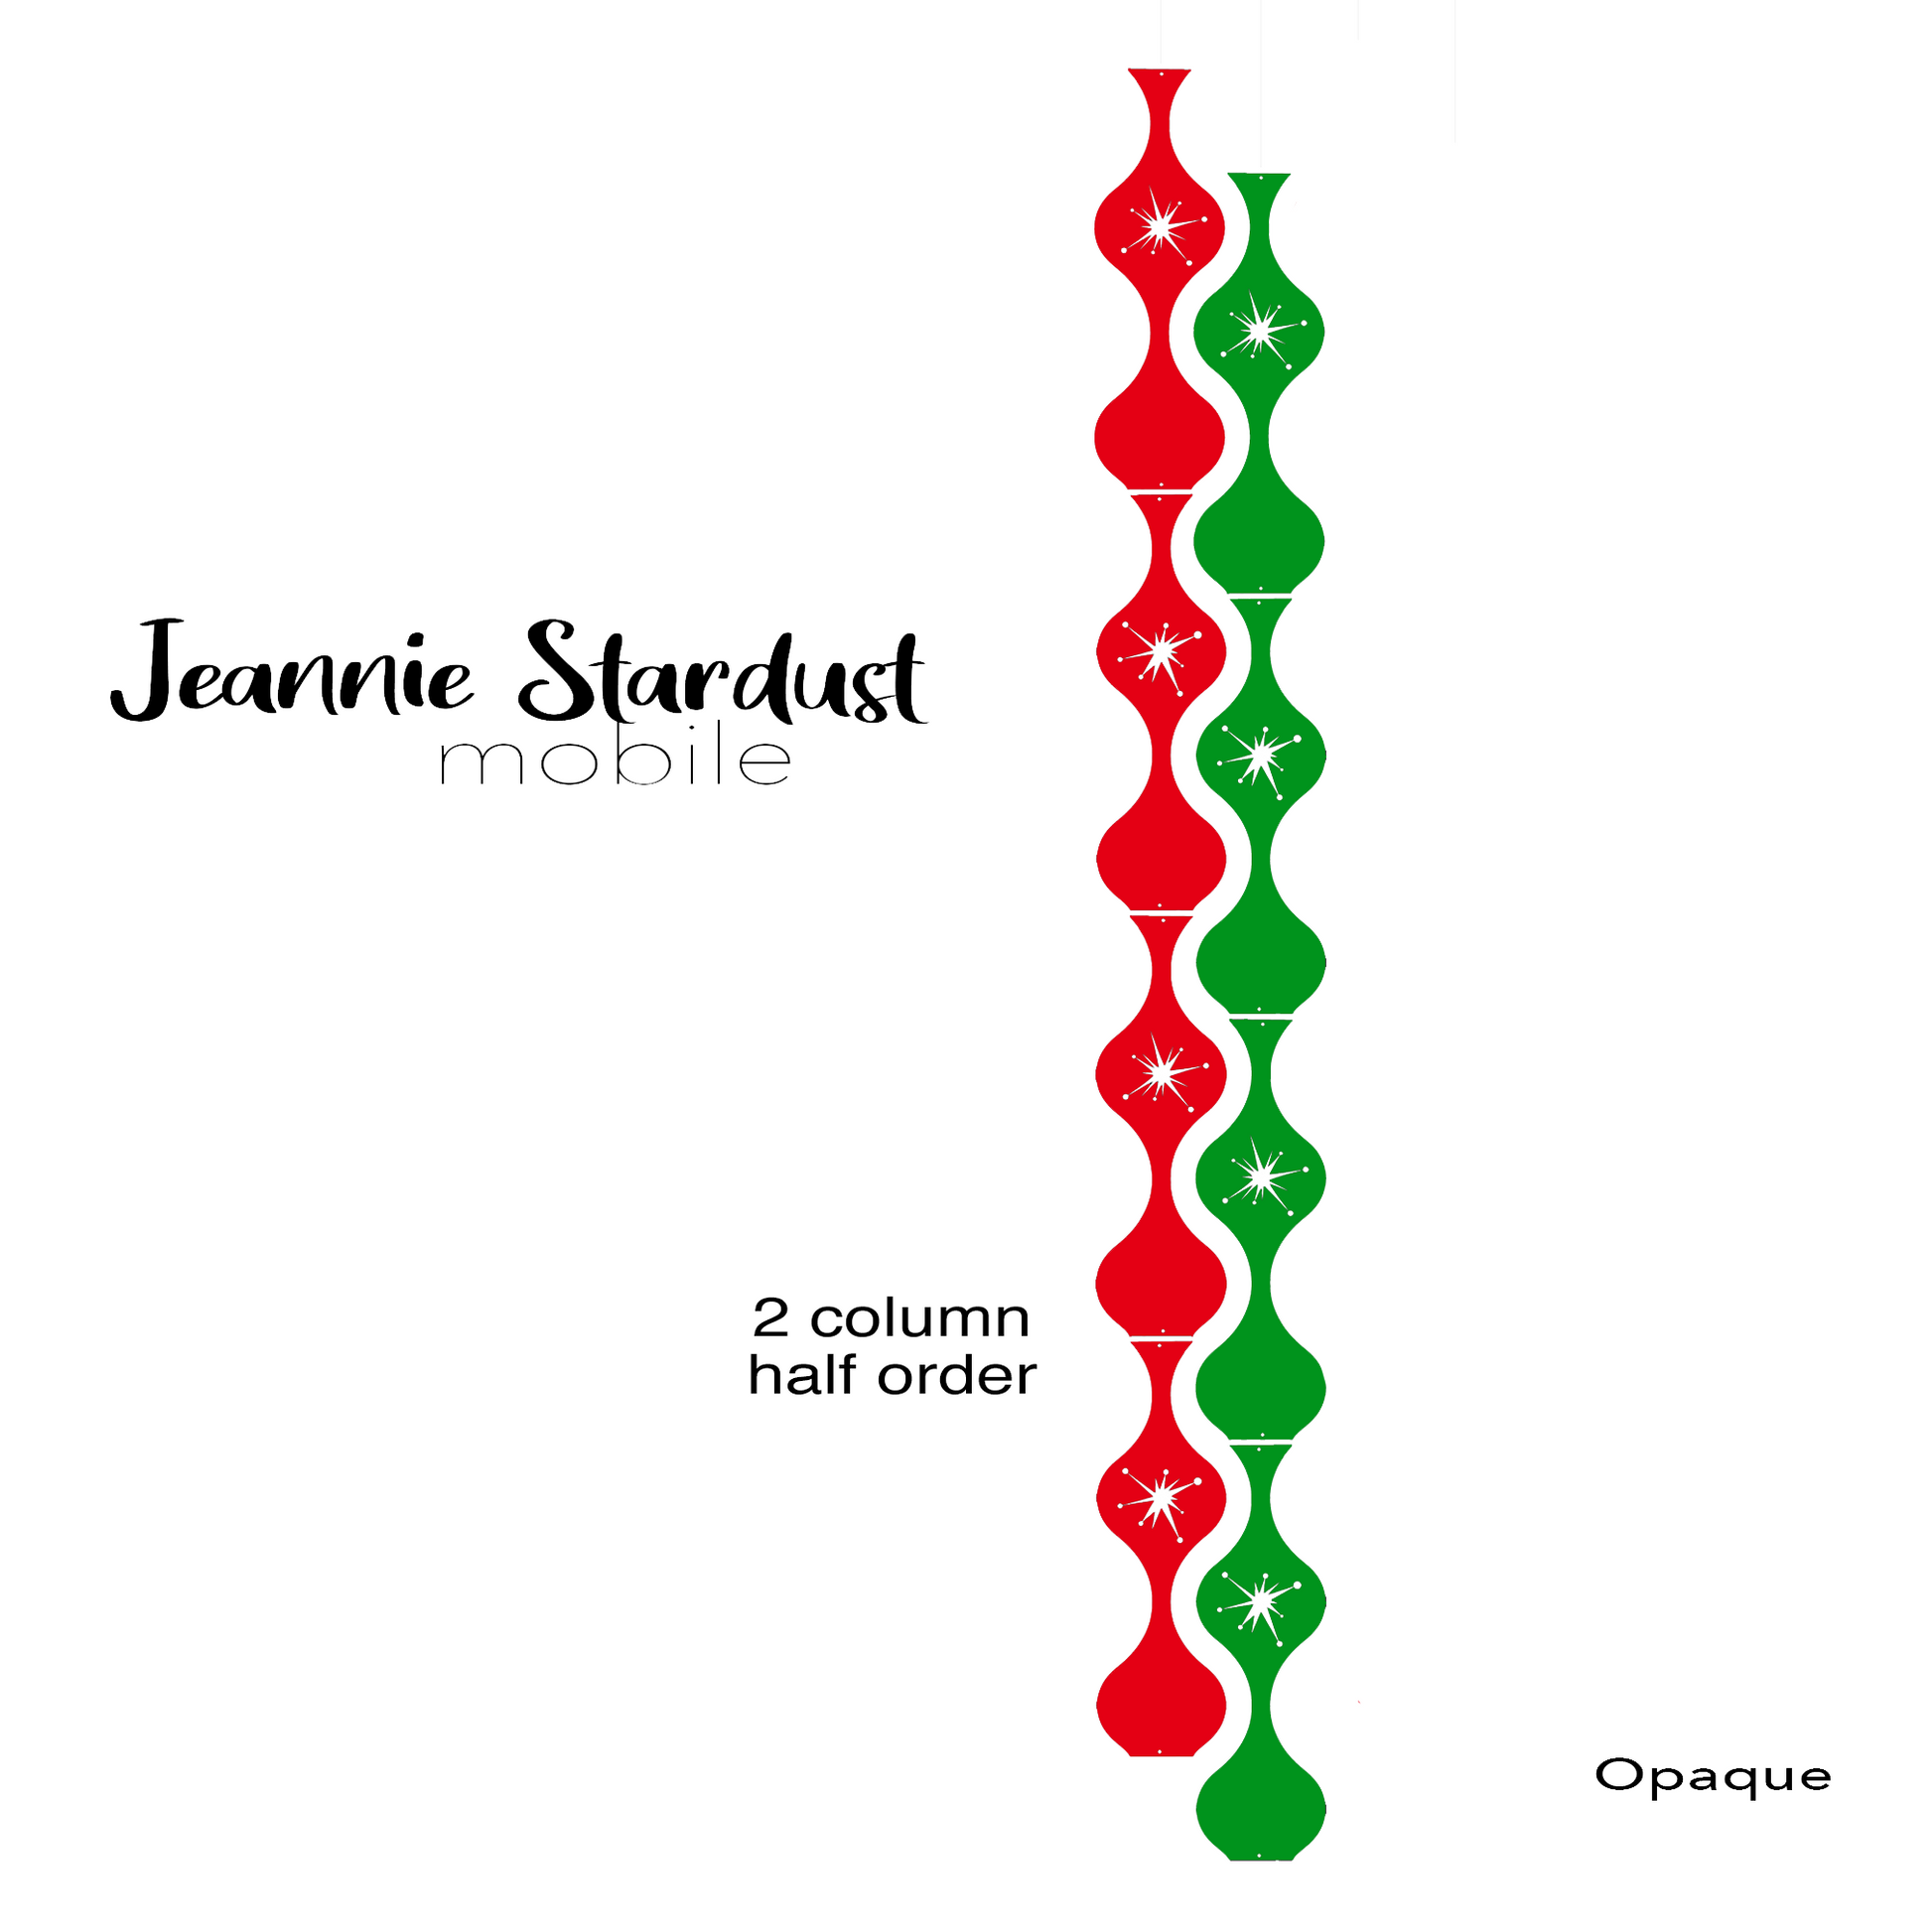 2 Column Half Order of Jeannie Stardust Opaque Red and Green Acrylic Mobile 6"x48" - DIY Kit - Featuring Starburst cutouts in the parts by AtomicMobiles.com